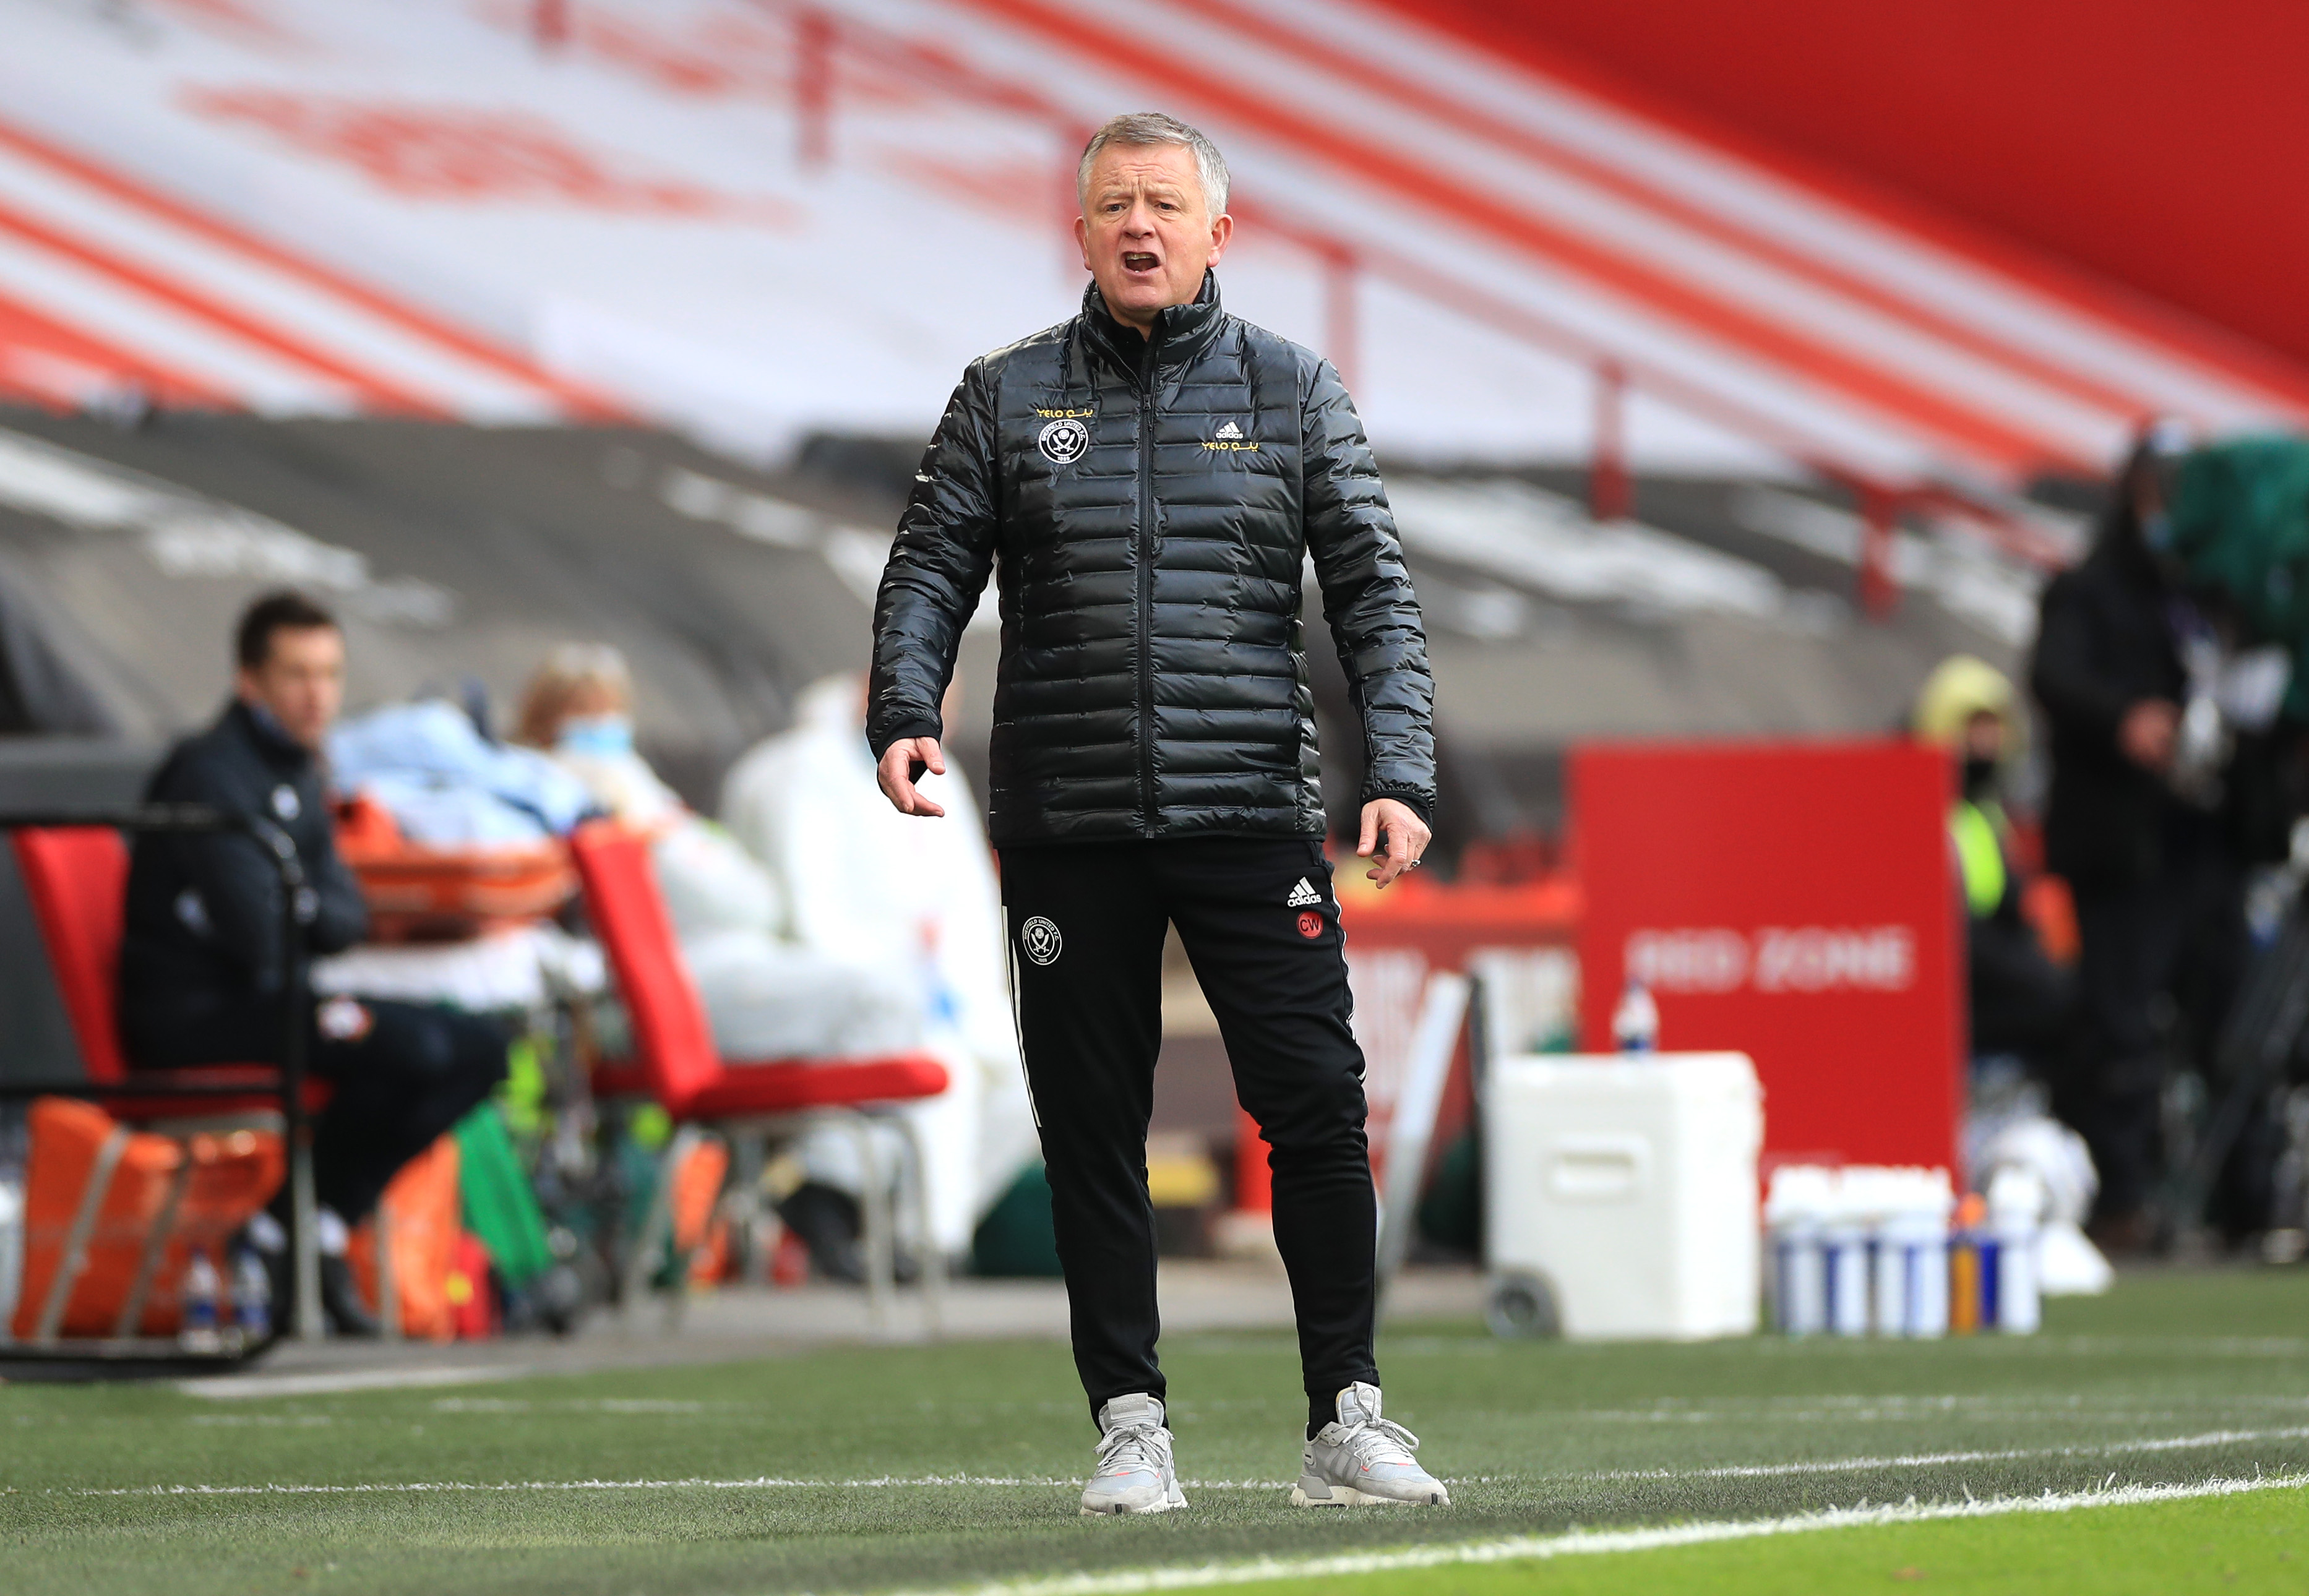  Chris Wilder, the manager of Sheffield United, looks on during a match, as his team has the worst defensive record in the Premier League.